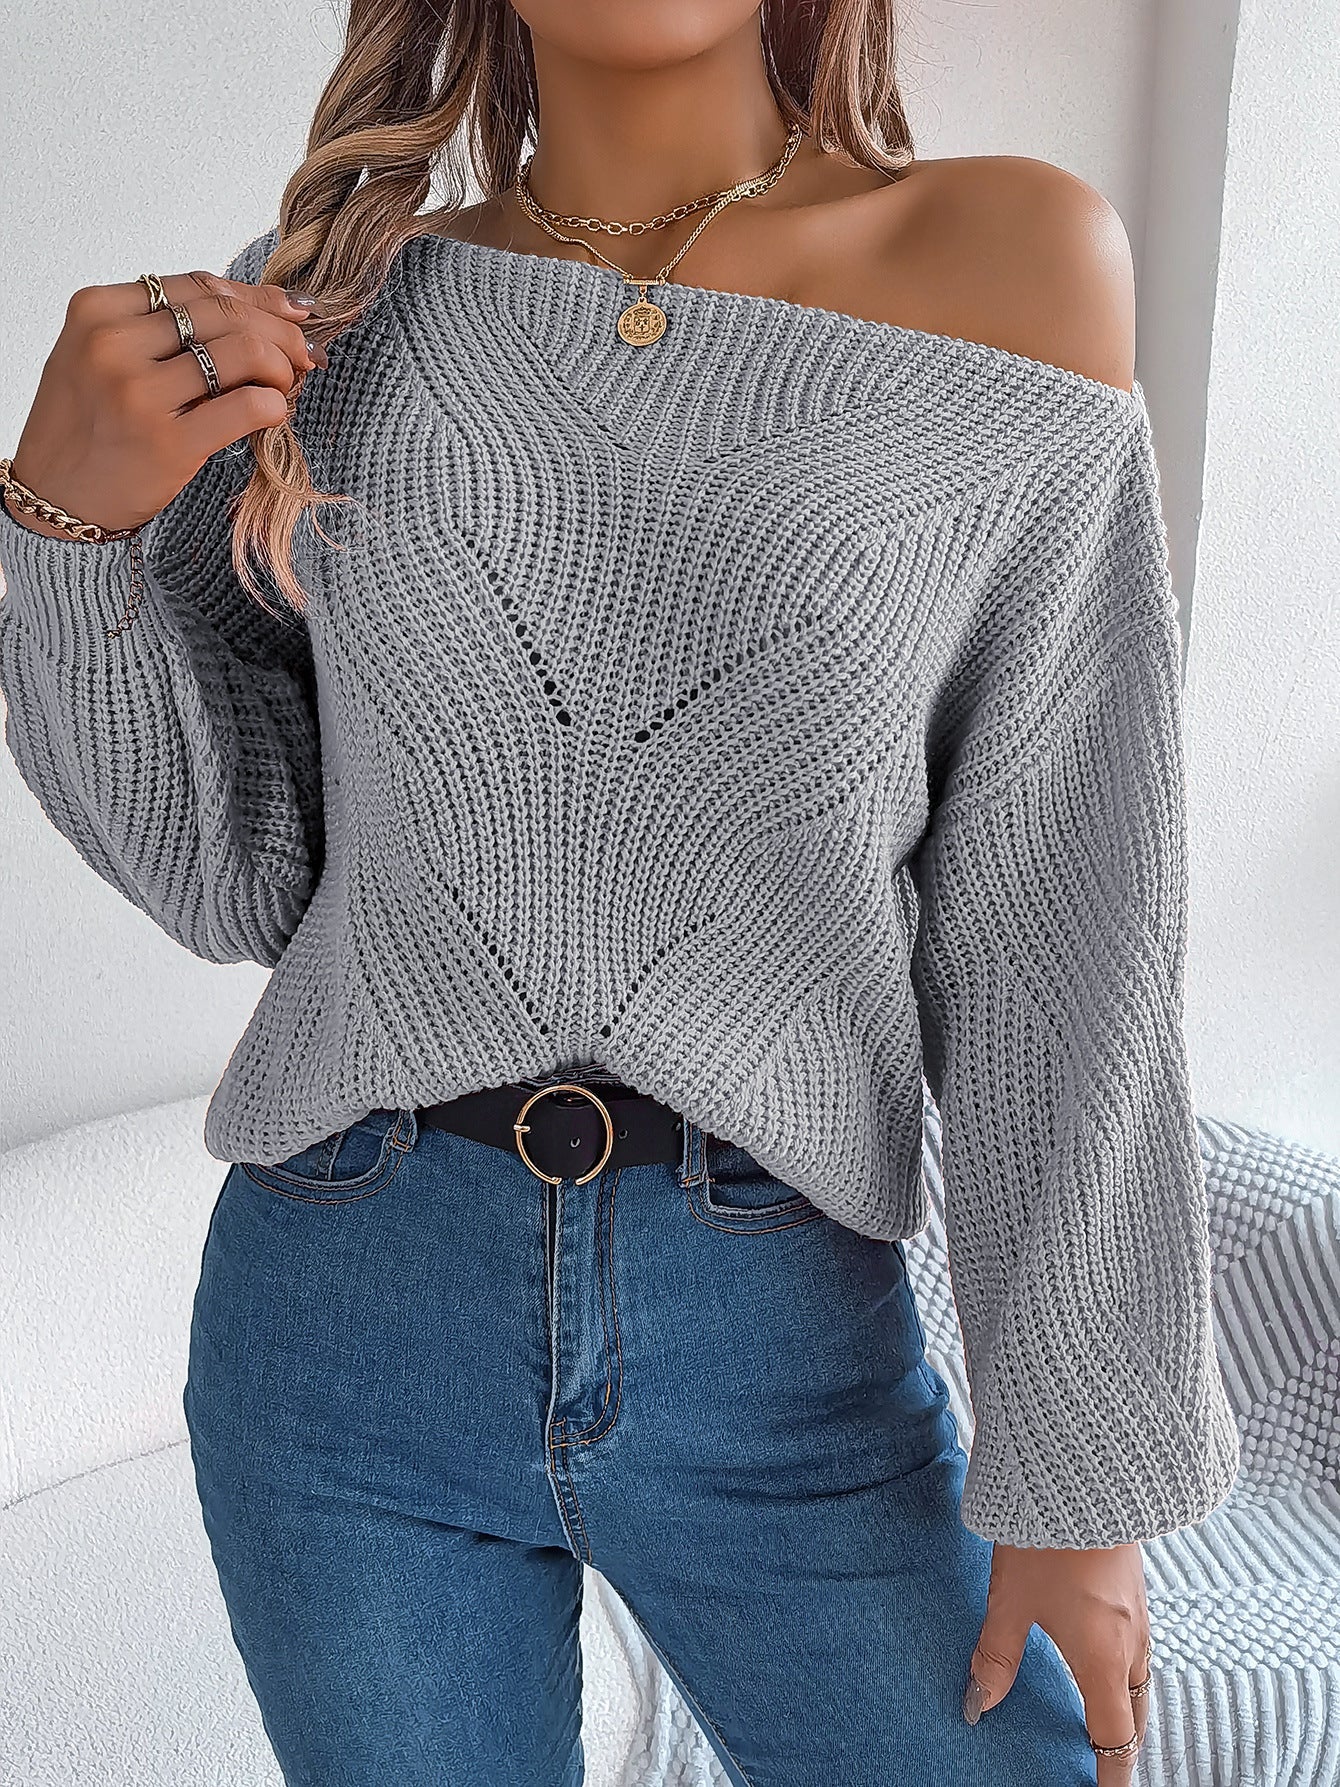 Autumn Winter Casual Hollow Out Cutout out off Neck off the Shoulder Lantern Sleeve Sweater Women Clothing